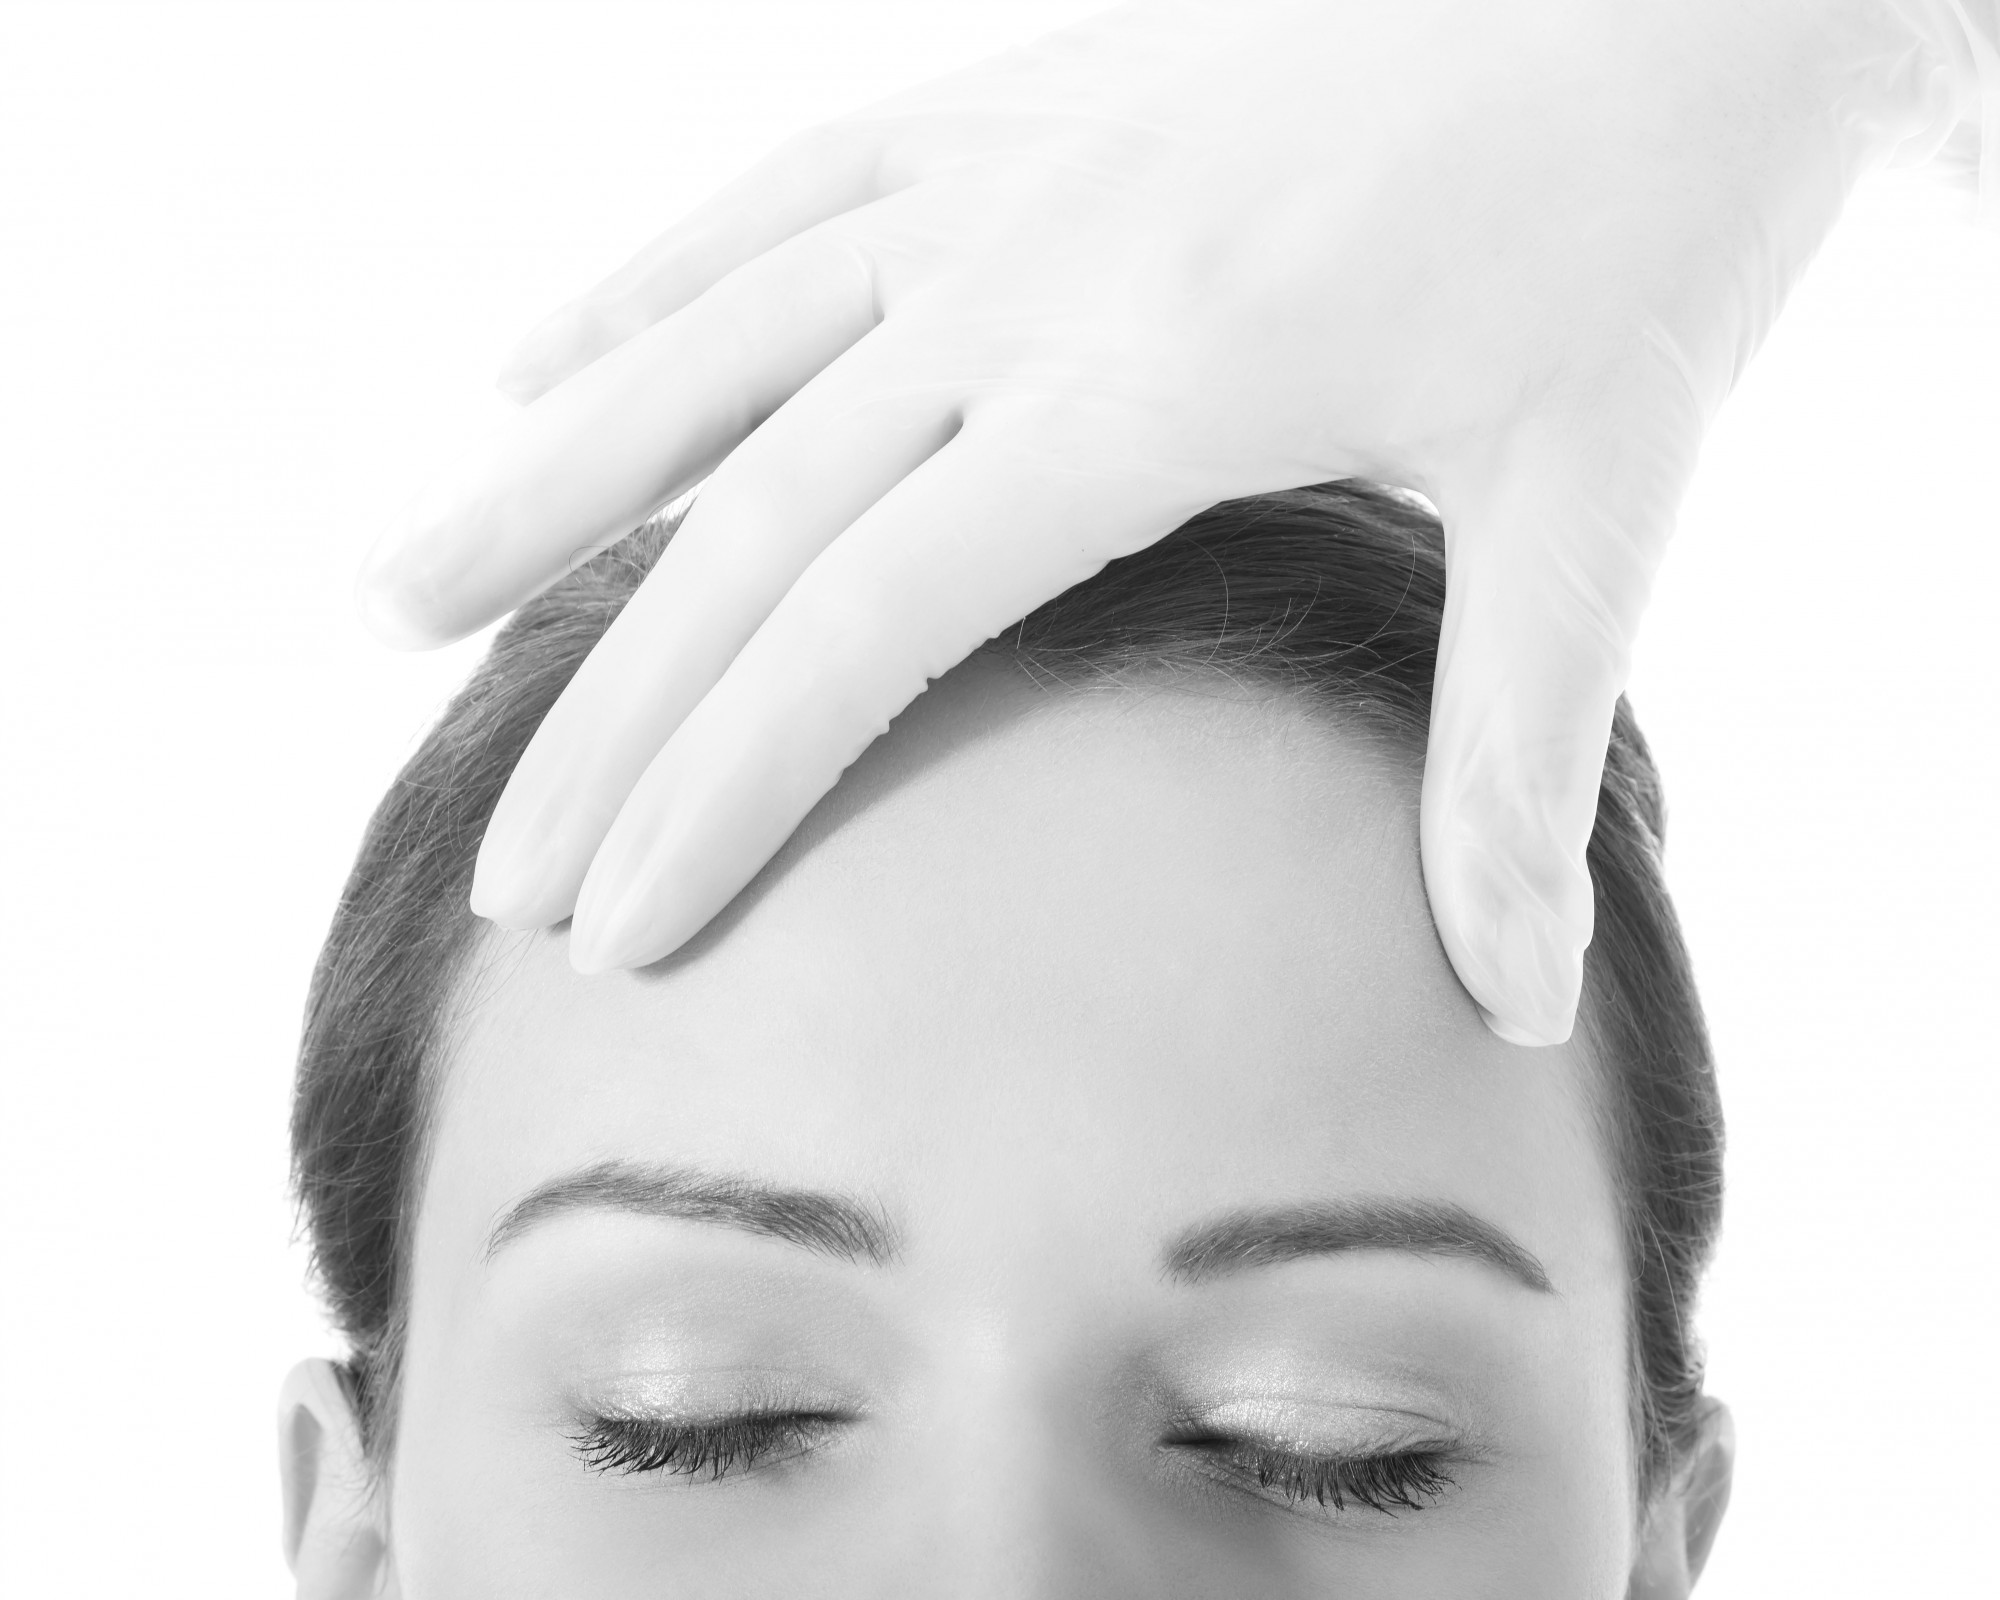 chirurgie esthétique lifting